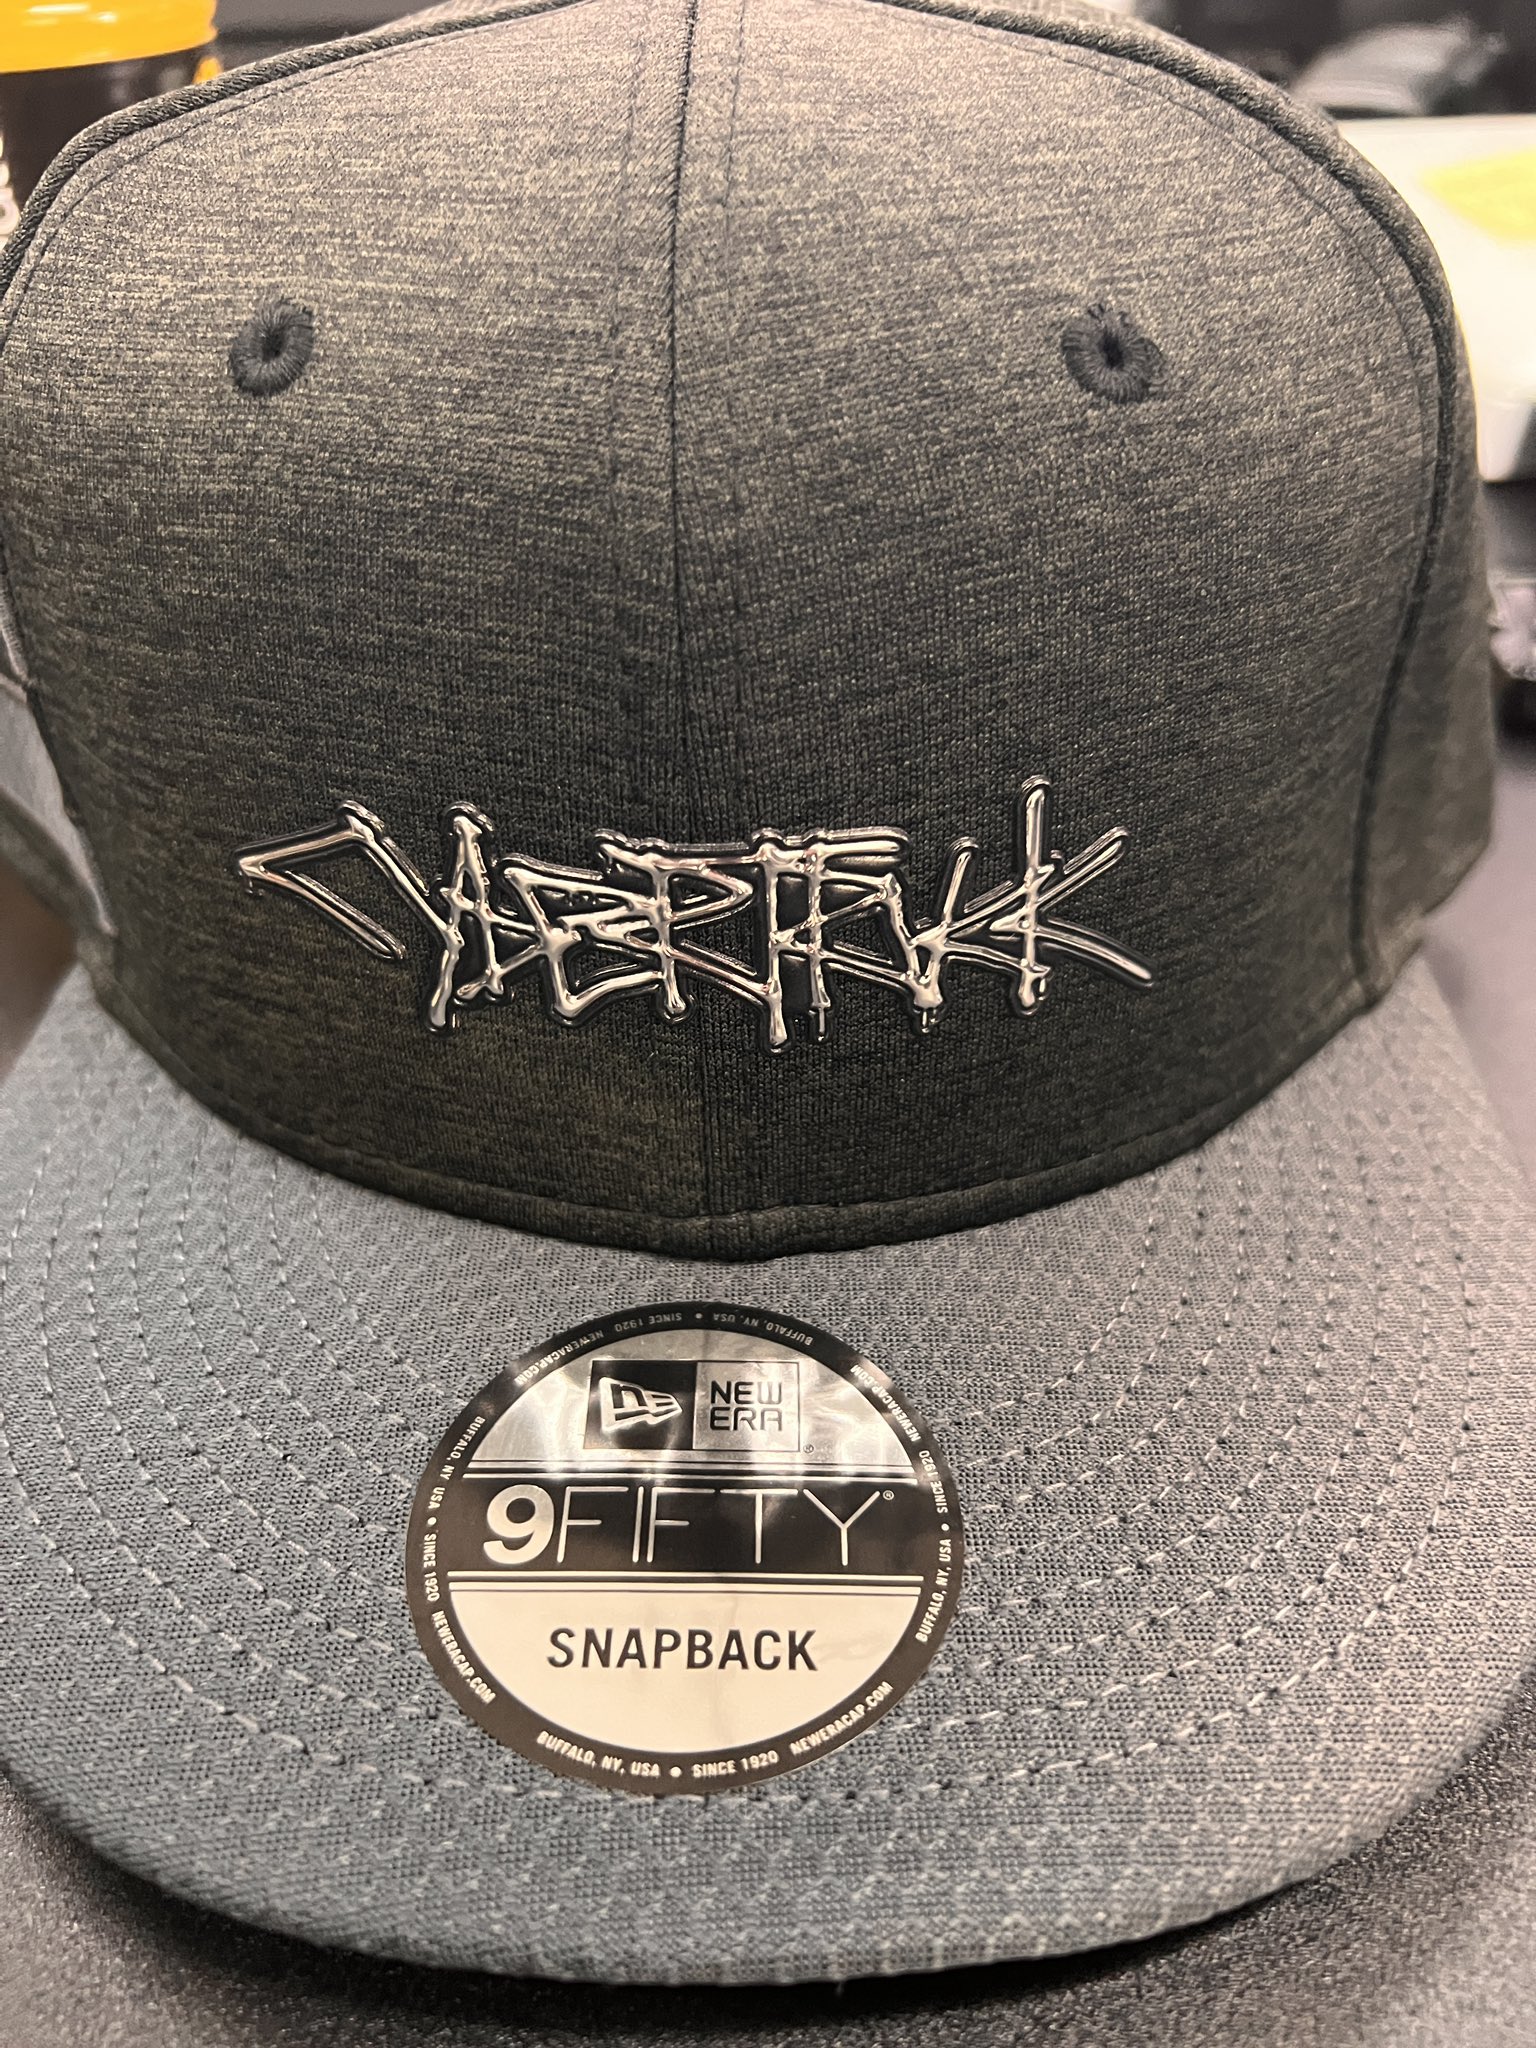 Cool new Cybertruck hat / cap (by New Era) being given out at Tesla ...